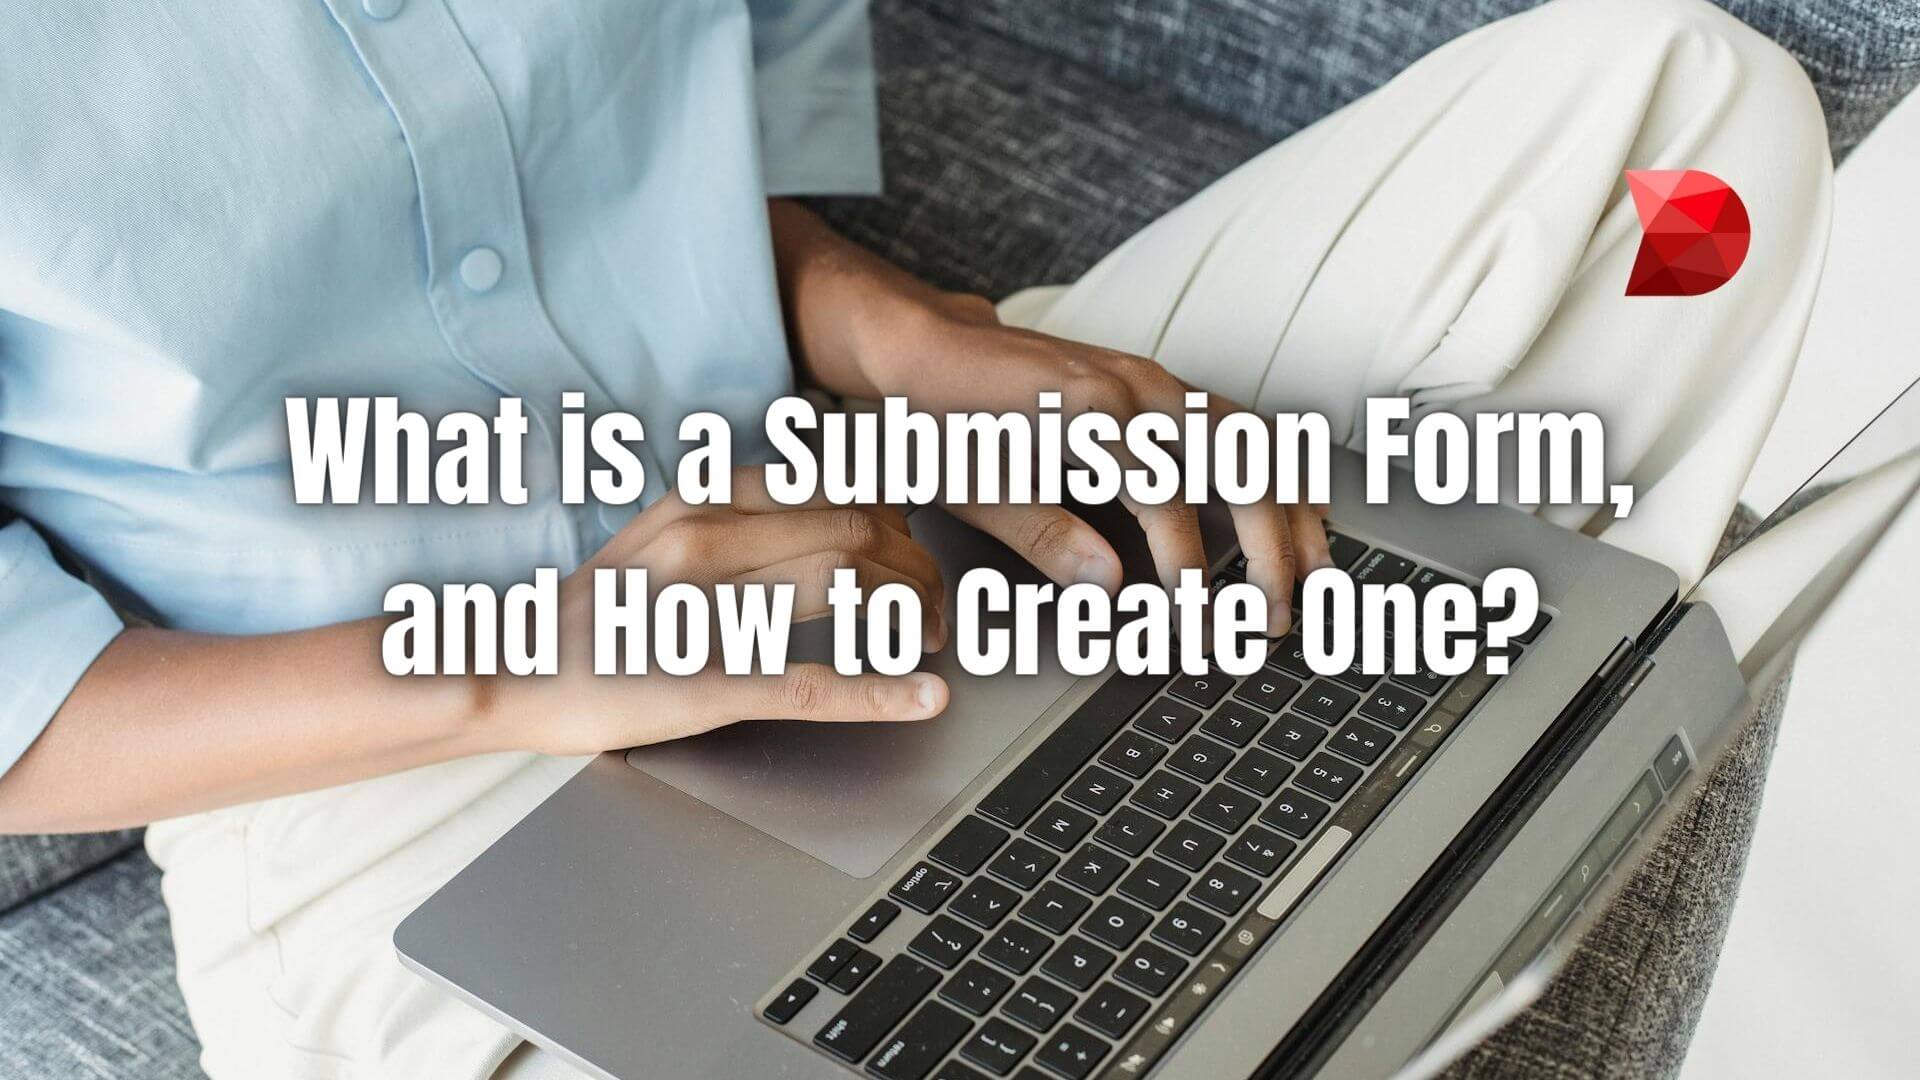 Unlock the potential of your submission forms with our expert guide. Learn how to create forms that engage users and drive conversions.